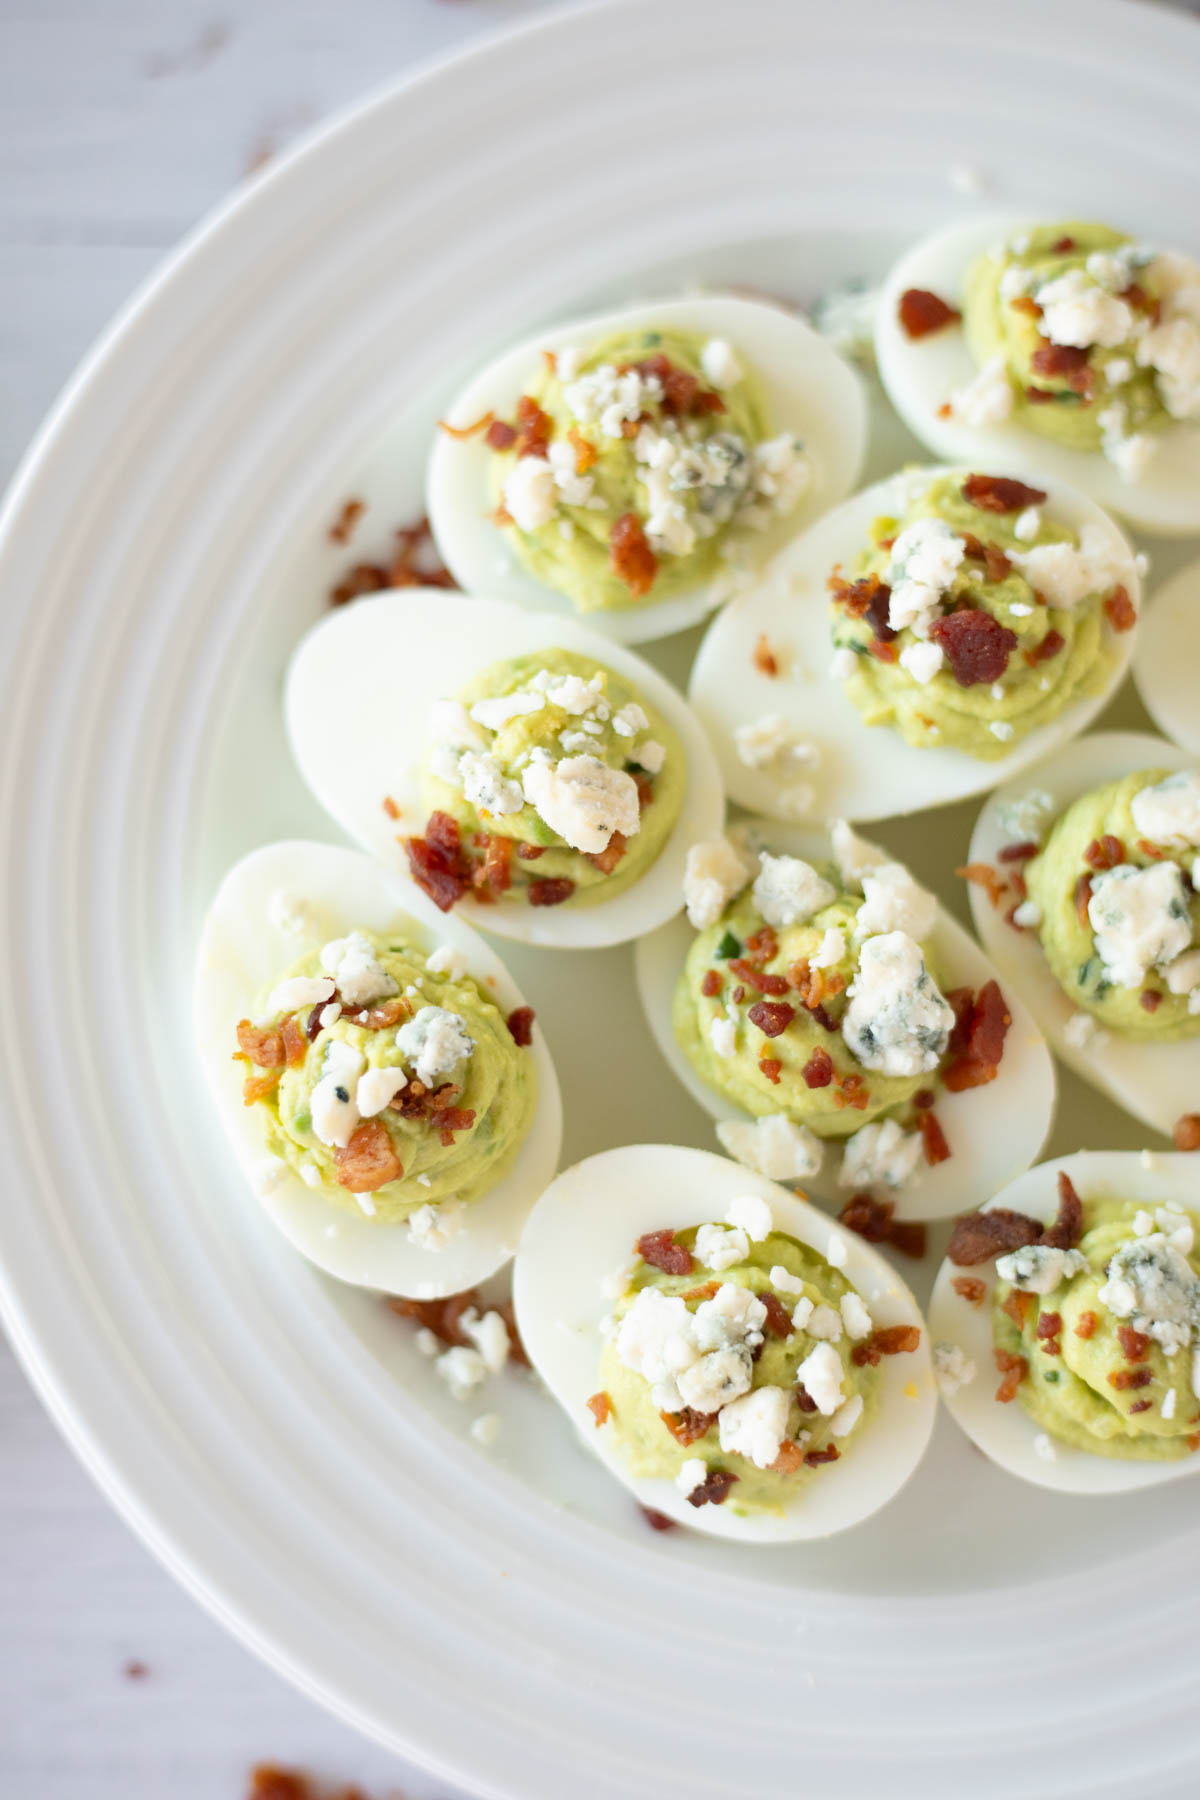 A plate of deviled eggs topped with crumbled bacon and blue cheese.